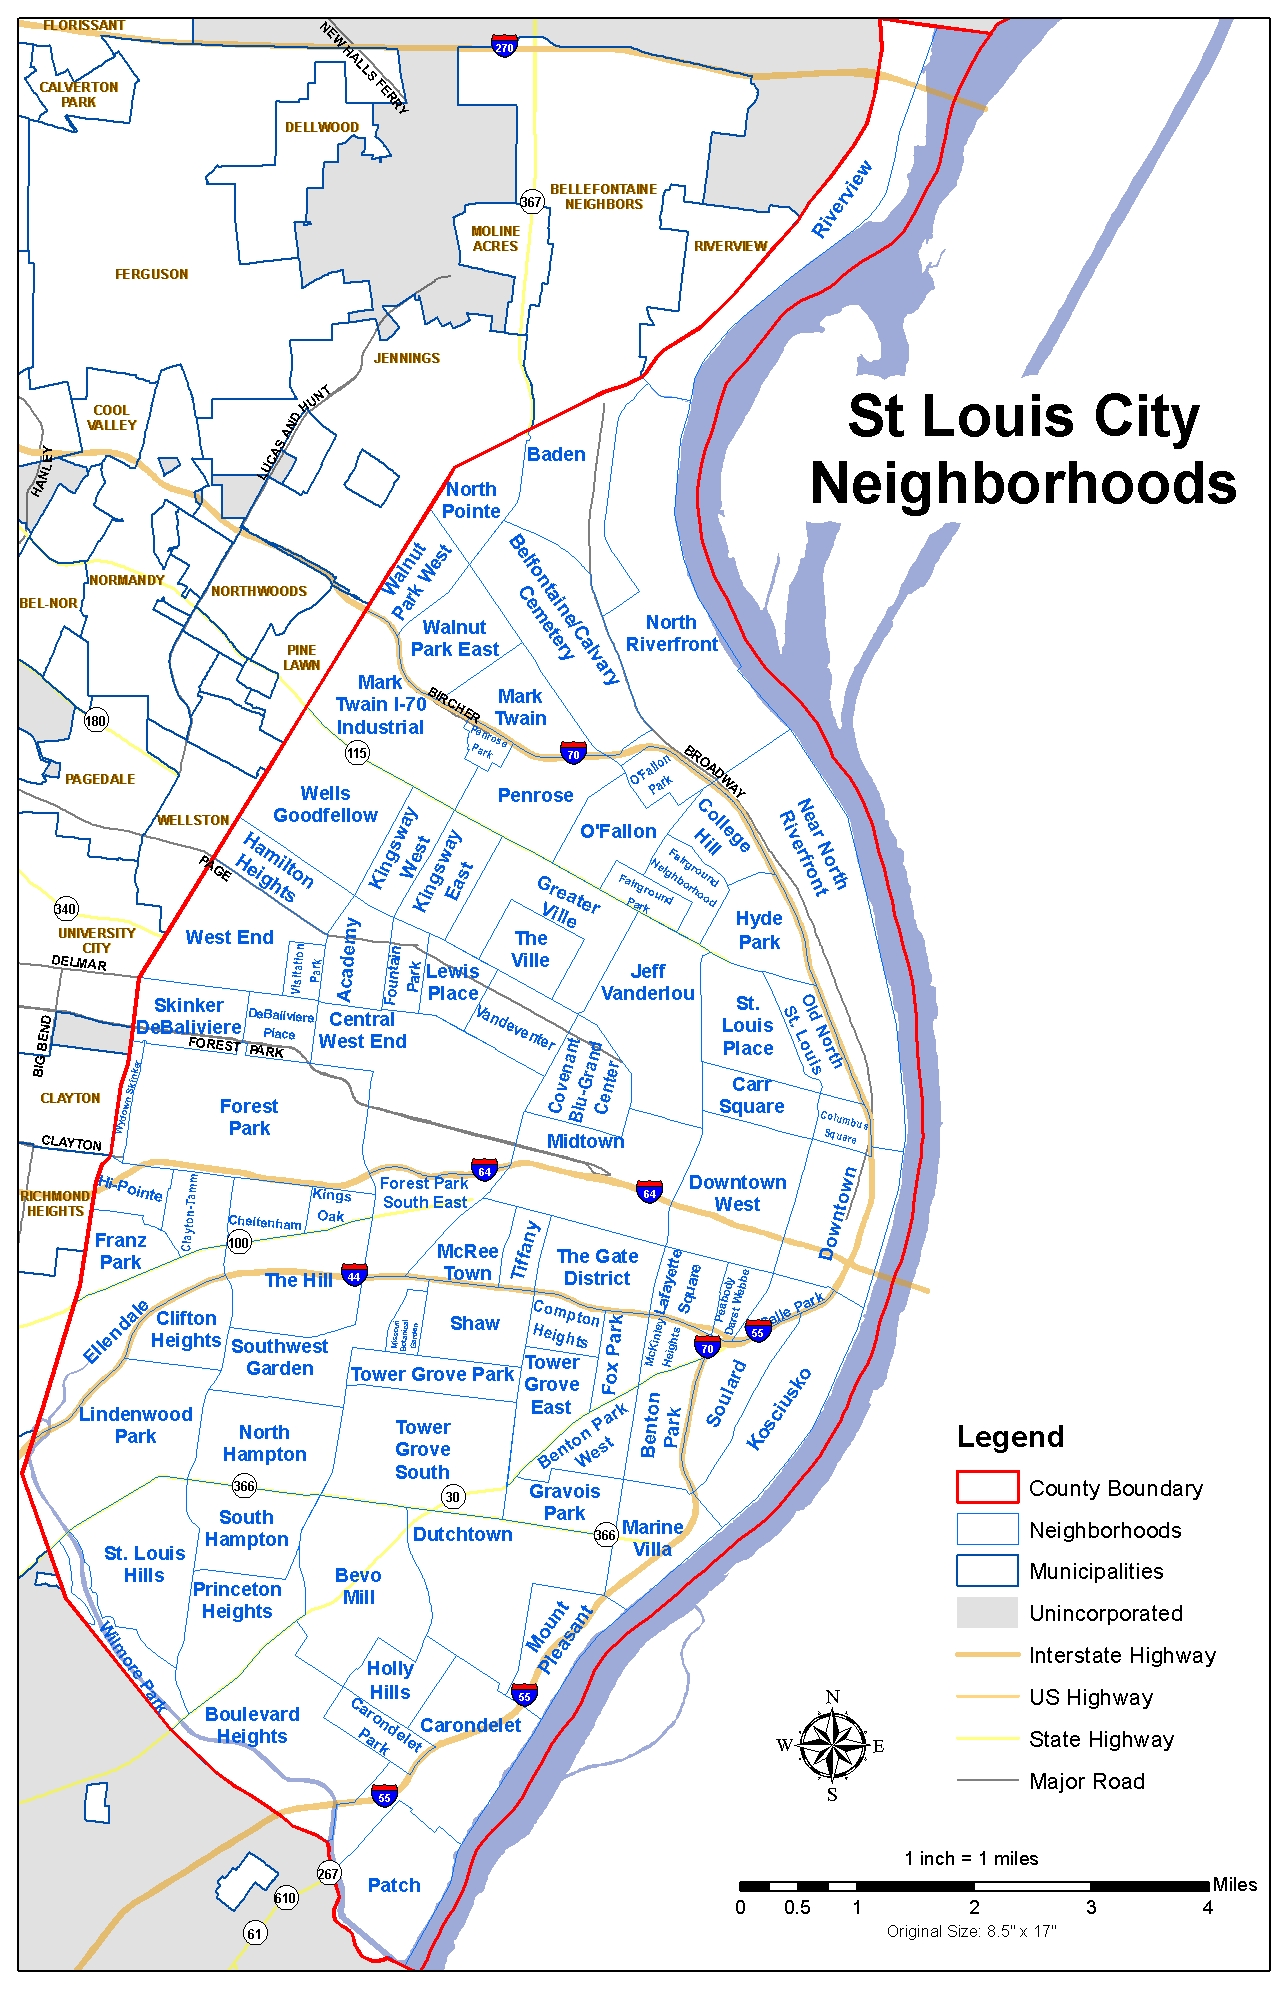 Check out this STL City Neighborhood Map I made! : StLouis